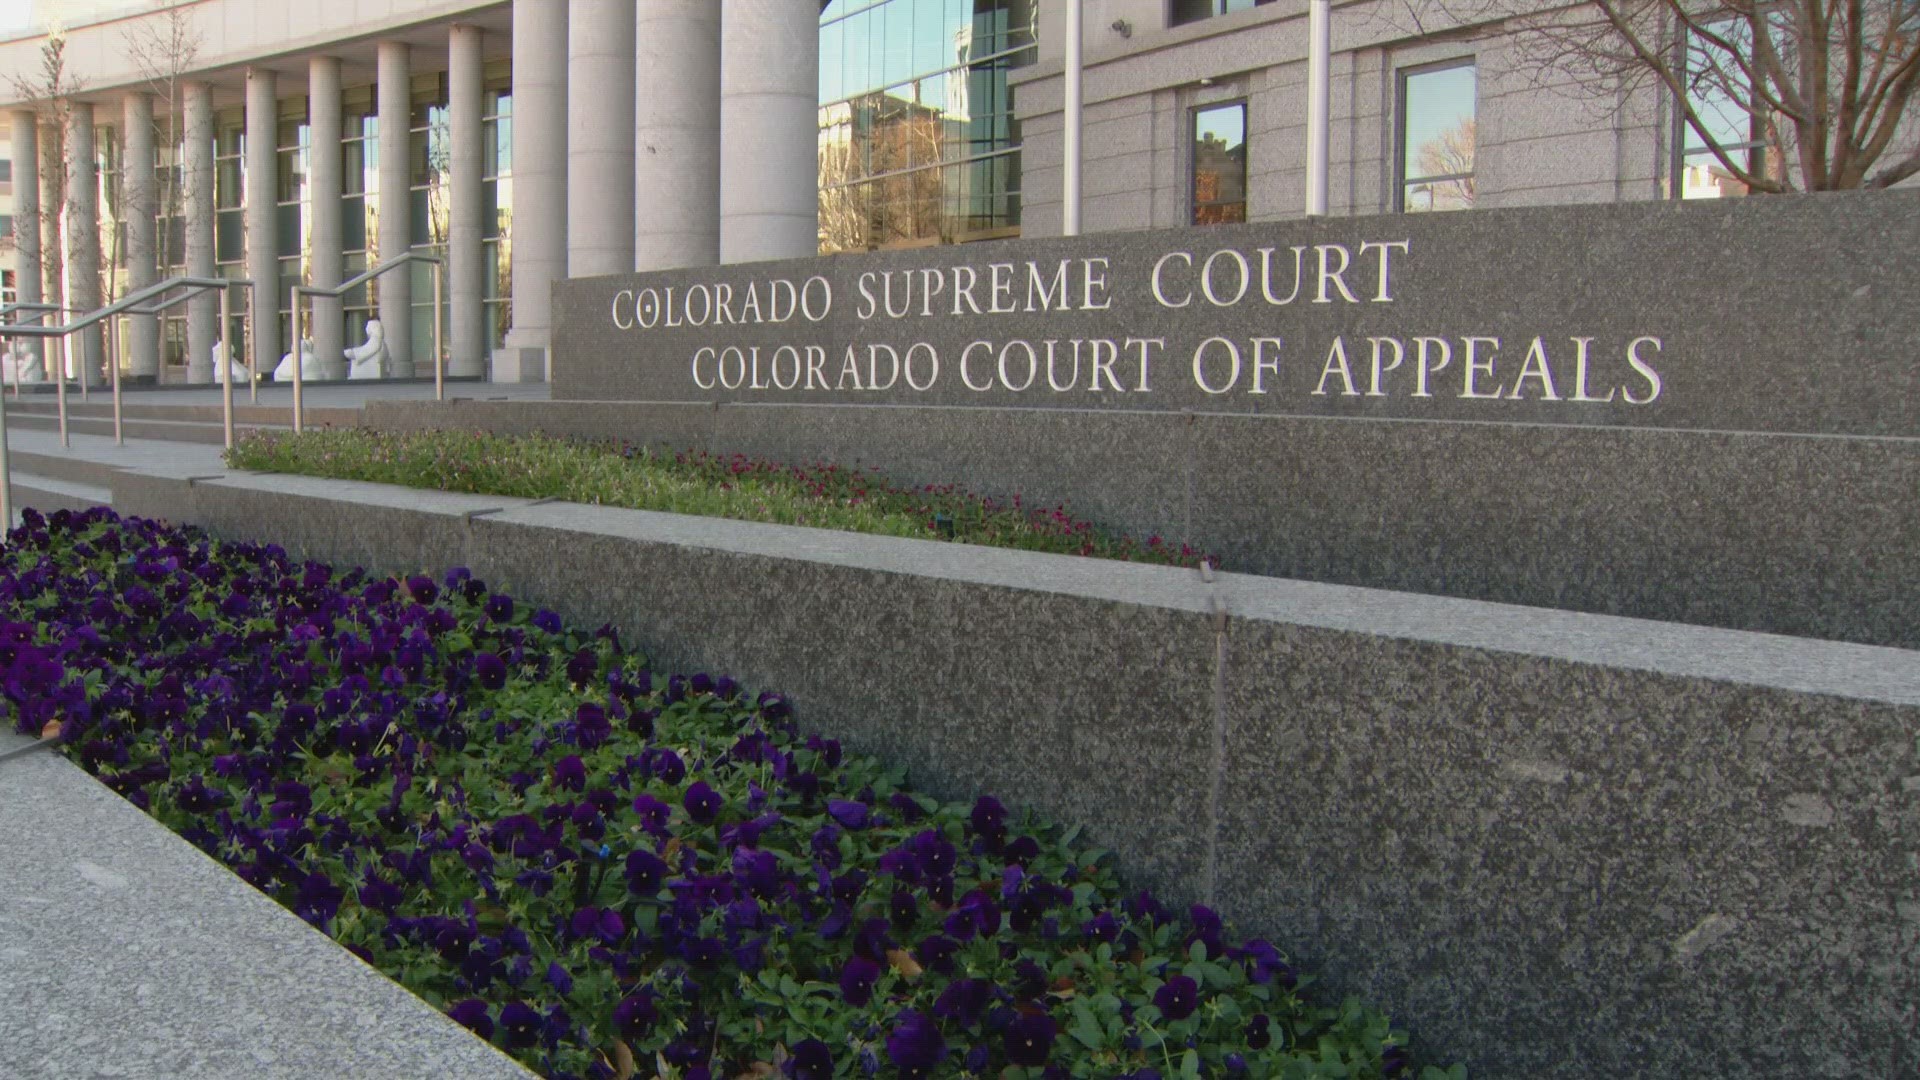 Legal Analyst Whitney Traylor weighs in as Colorado's Supreme Court reviews DPS' safety plan, and whether it violates the constitutional right of students.